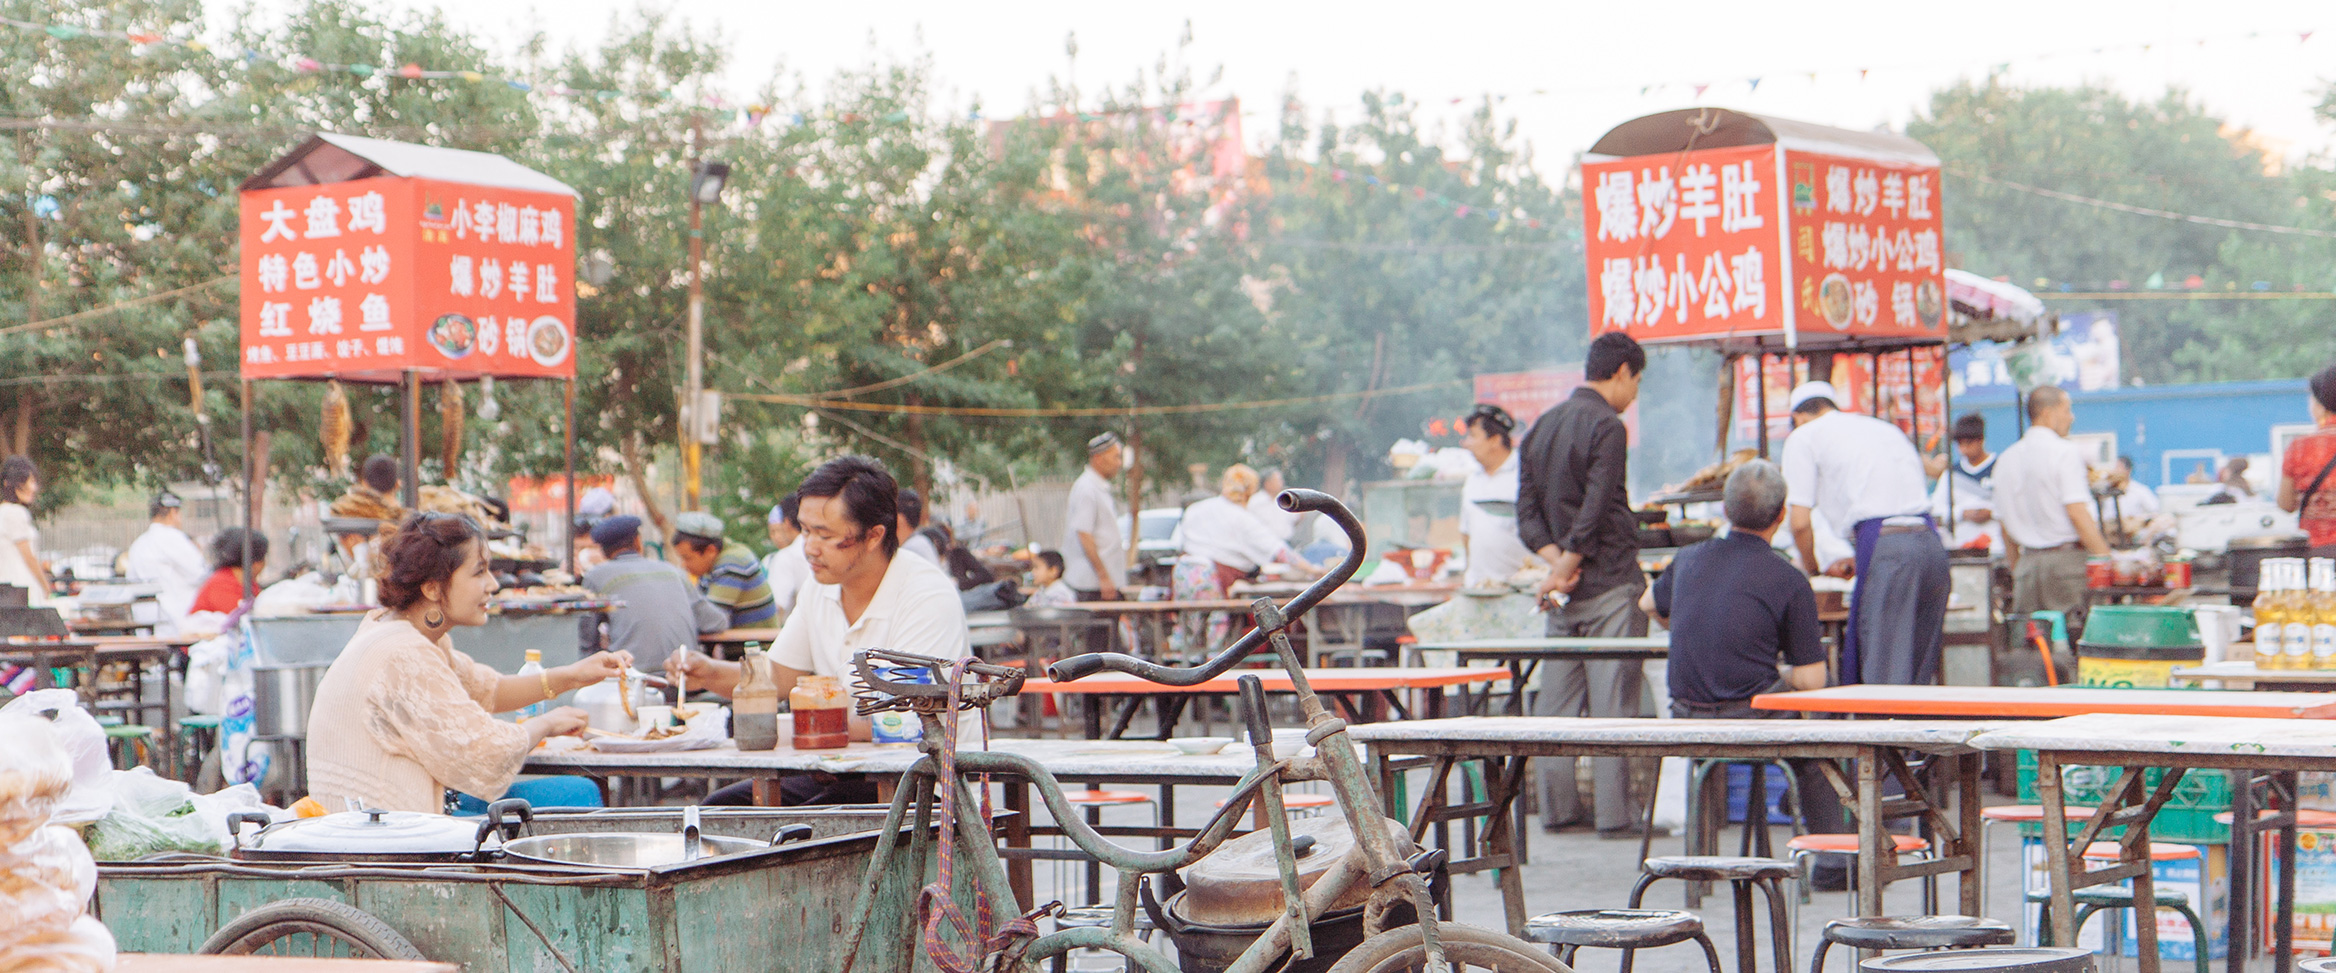 Dining on the Streets of Turpan